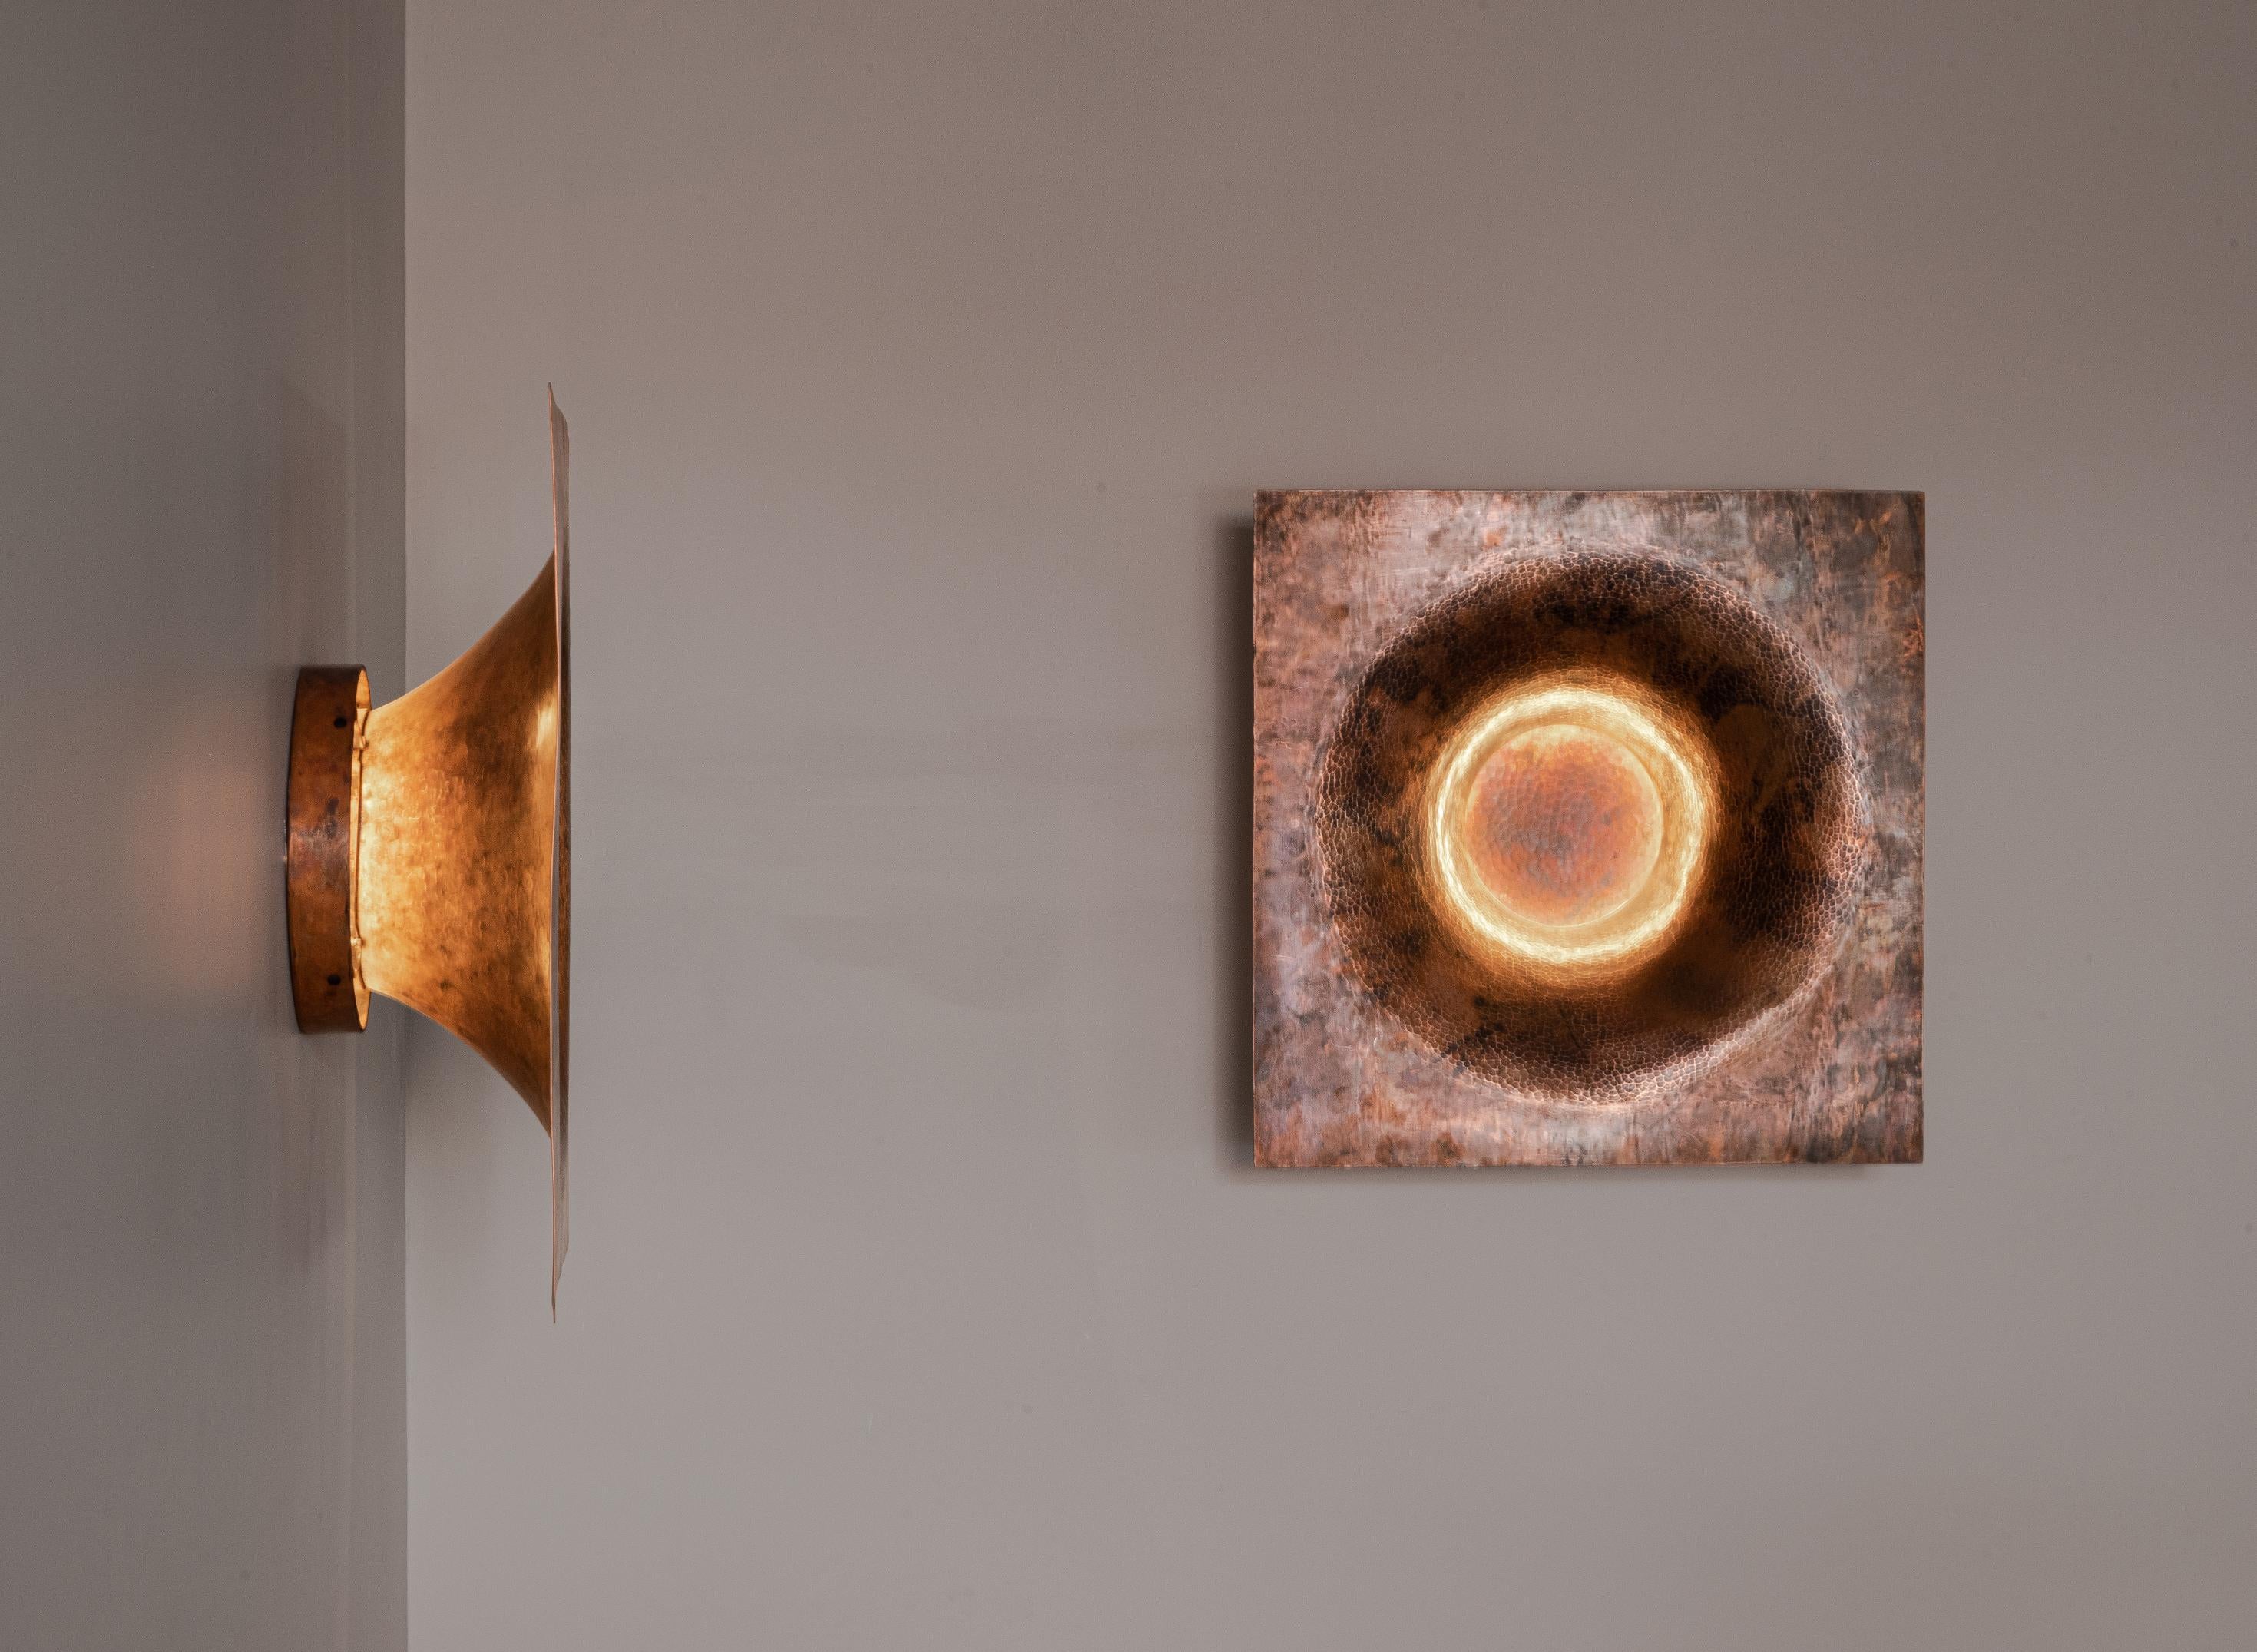 OBJ-07 copper wall lamp by Manu Bano
Dimensions: W 60 x D 60 x H 15 cm
Material: Copper

Manu Bañó's new collection explores the limits and properties of copper. It was produced in Santa Clara Del Cobre, Michoacán, a magical town with a long